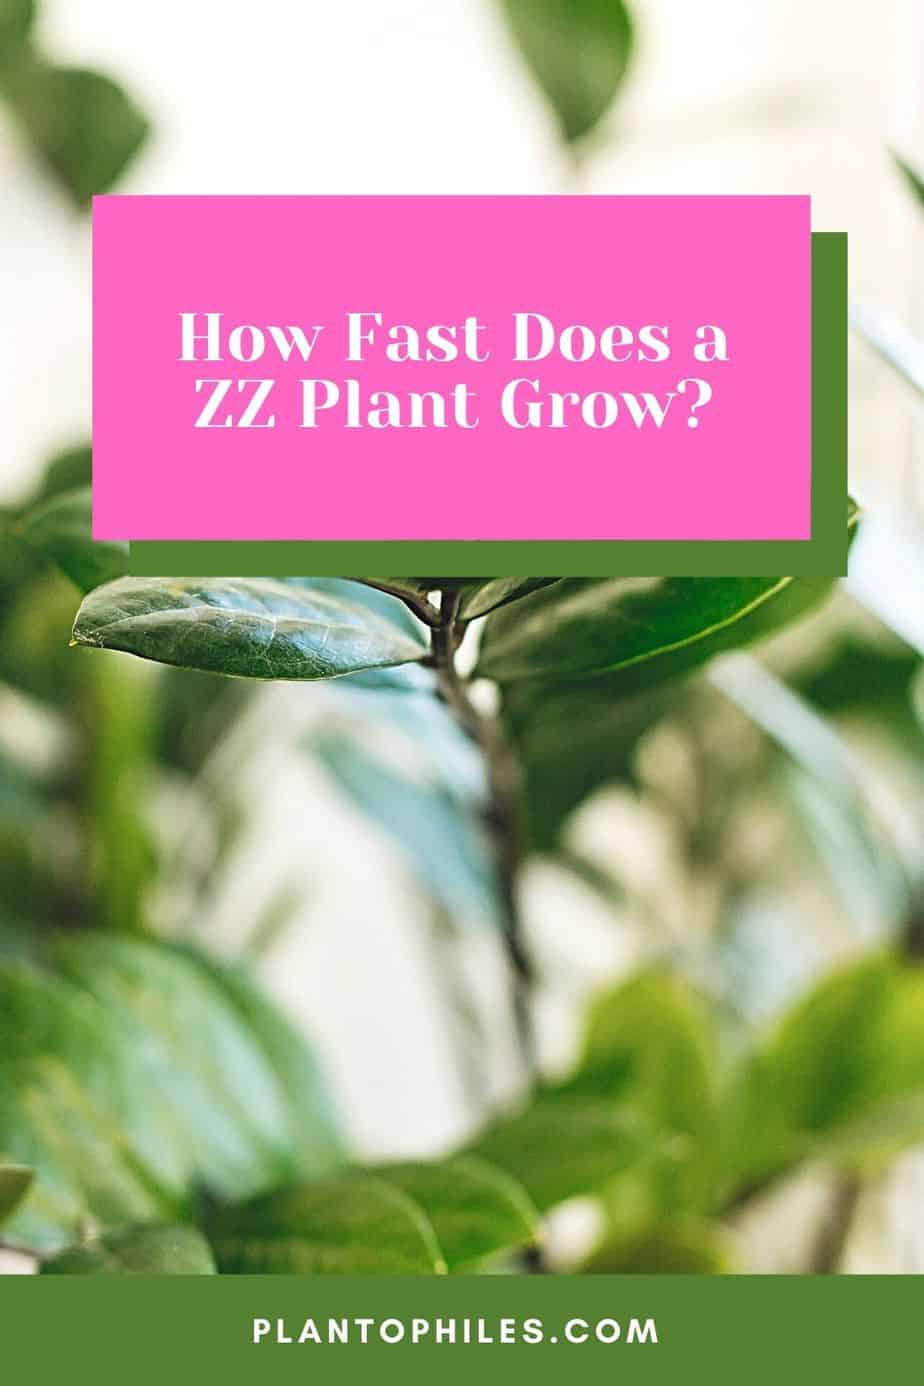 How Fast Does a ZZ Plant Grow?